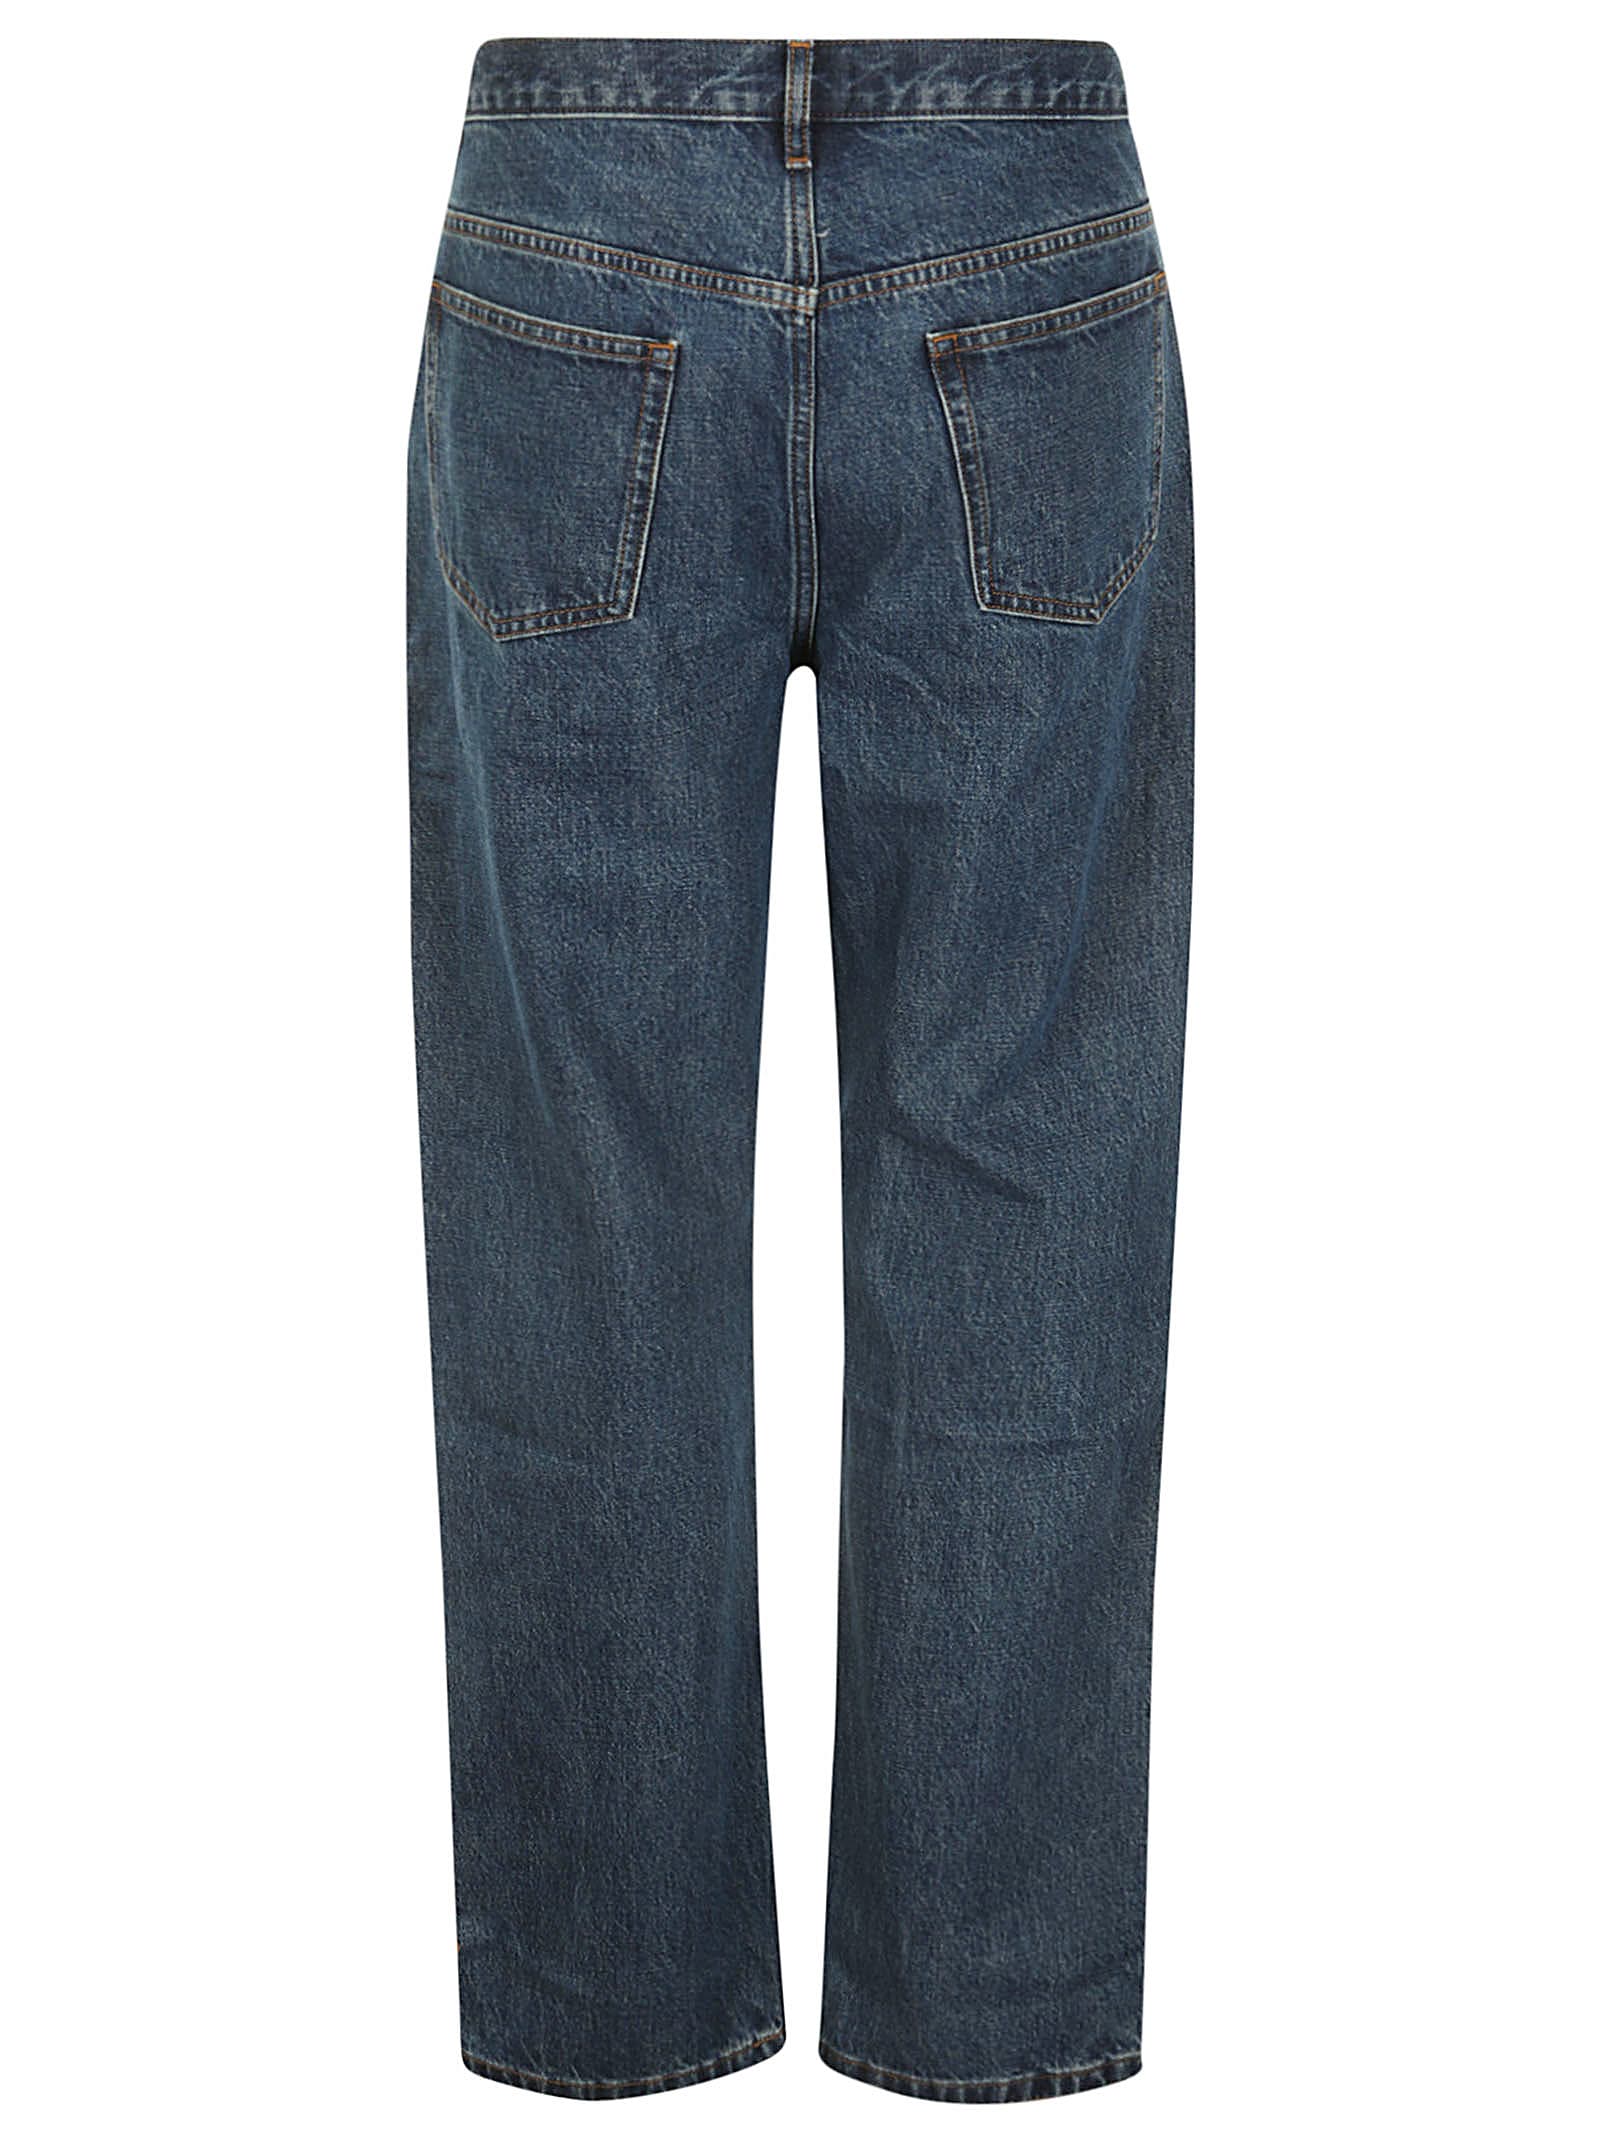 Shop Apc Relaxed Jean H In Ial Washed Indigo